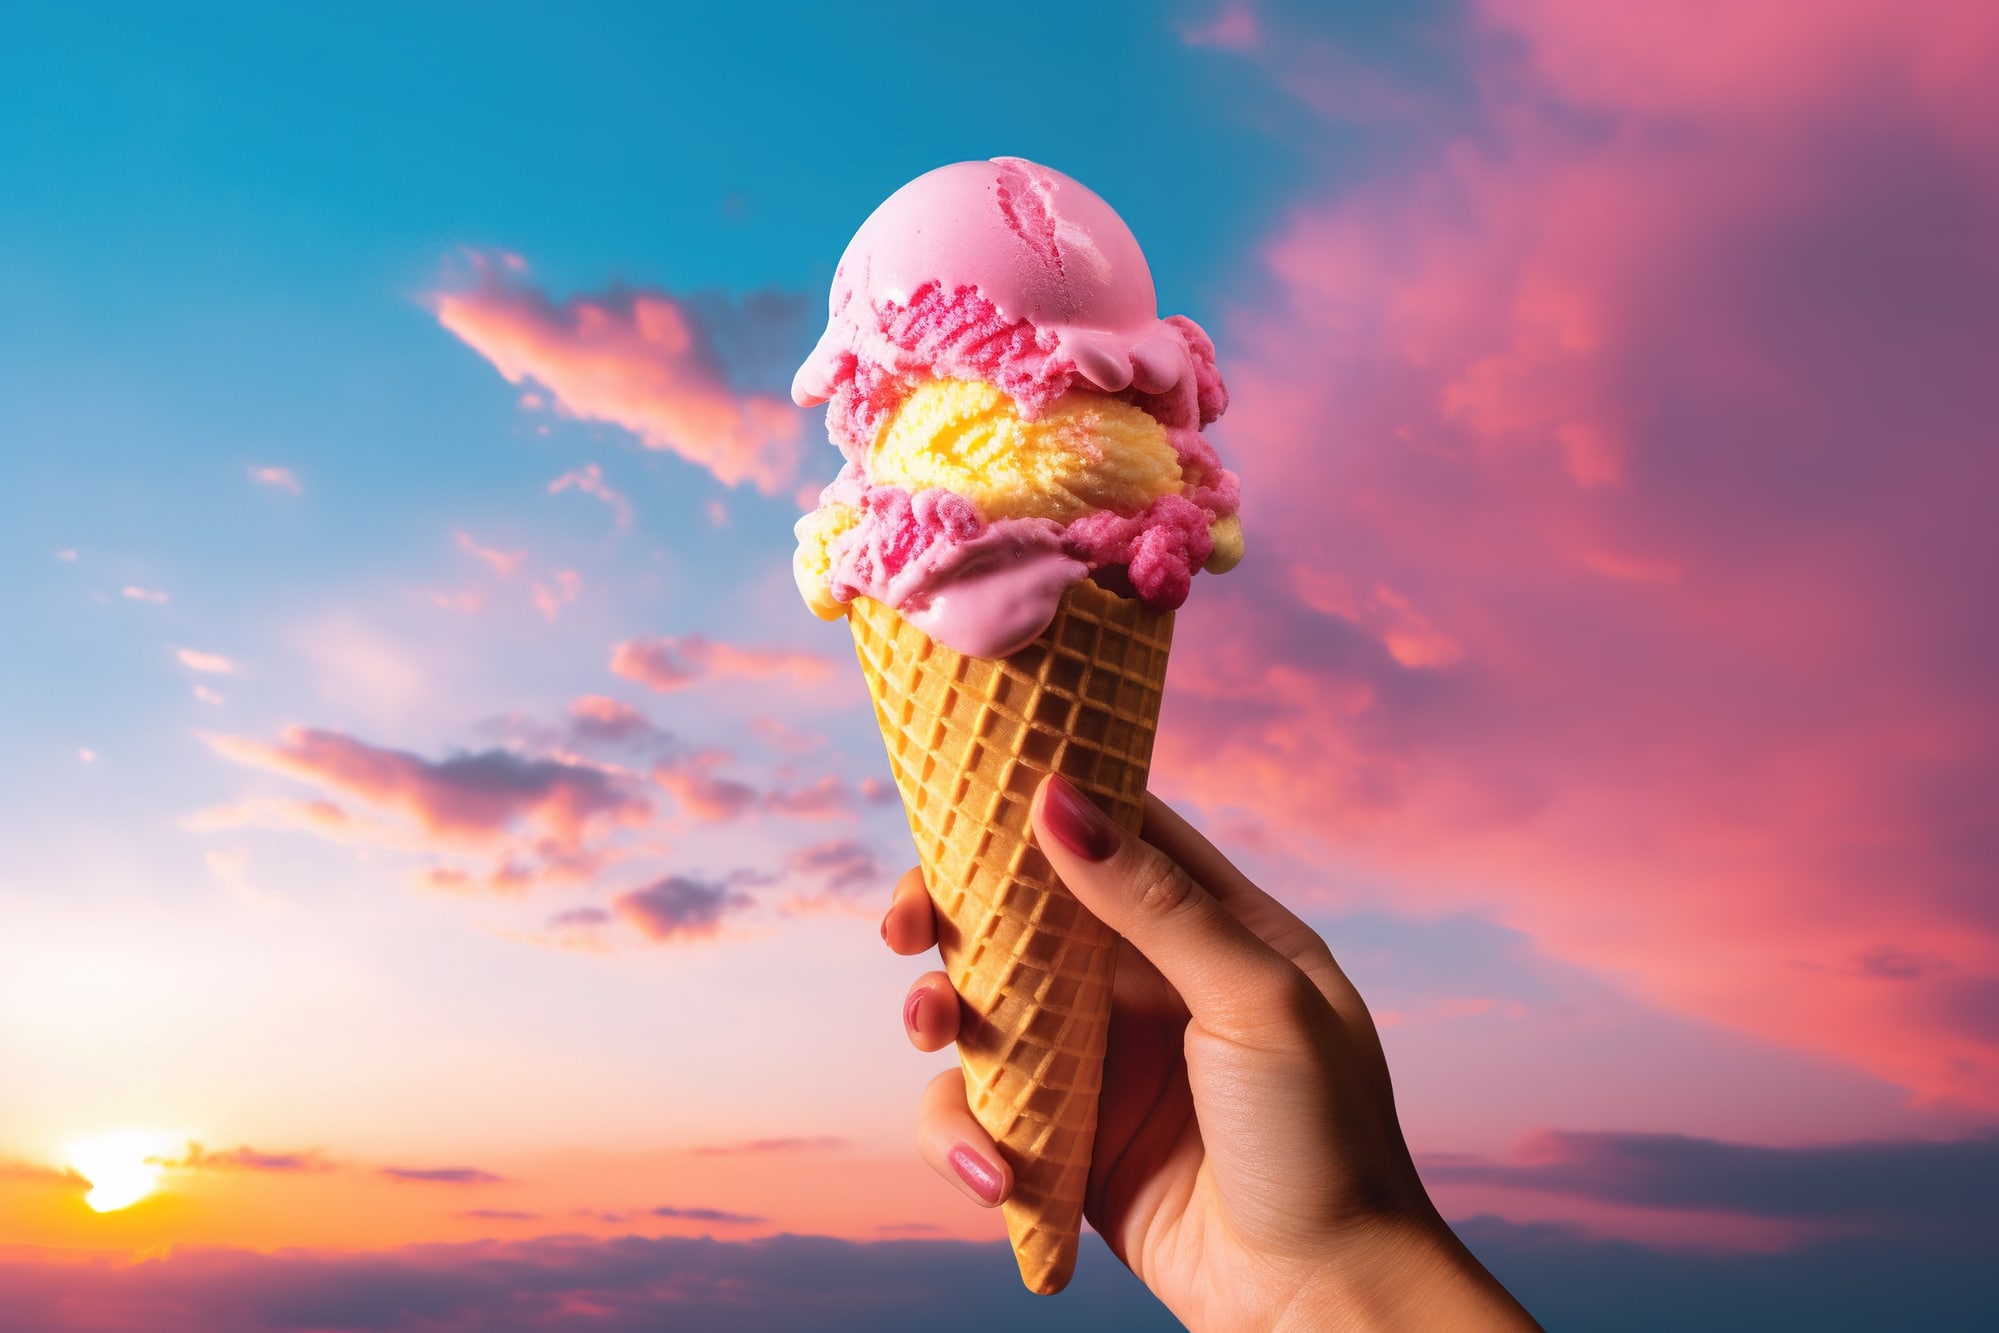 horizontal photo of a hand holding an ice cream cone against a blue sky with pink, sunset clouds